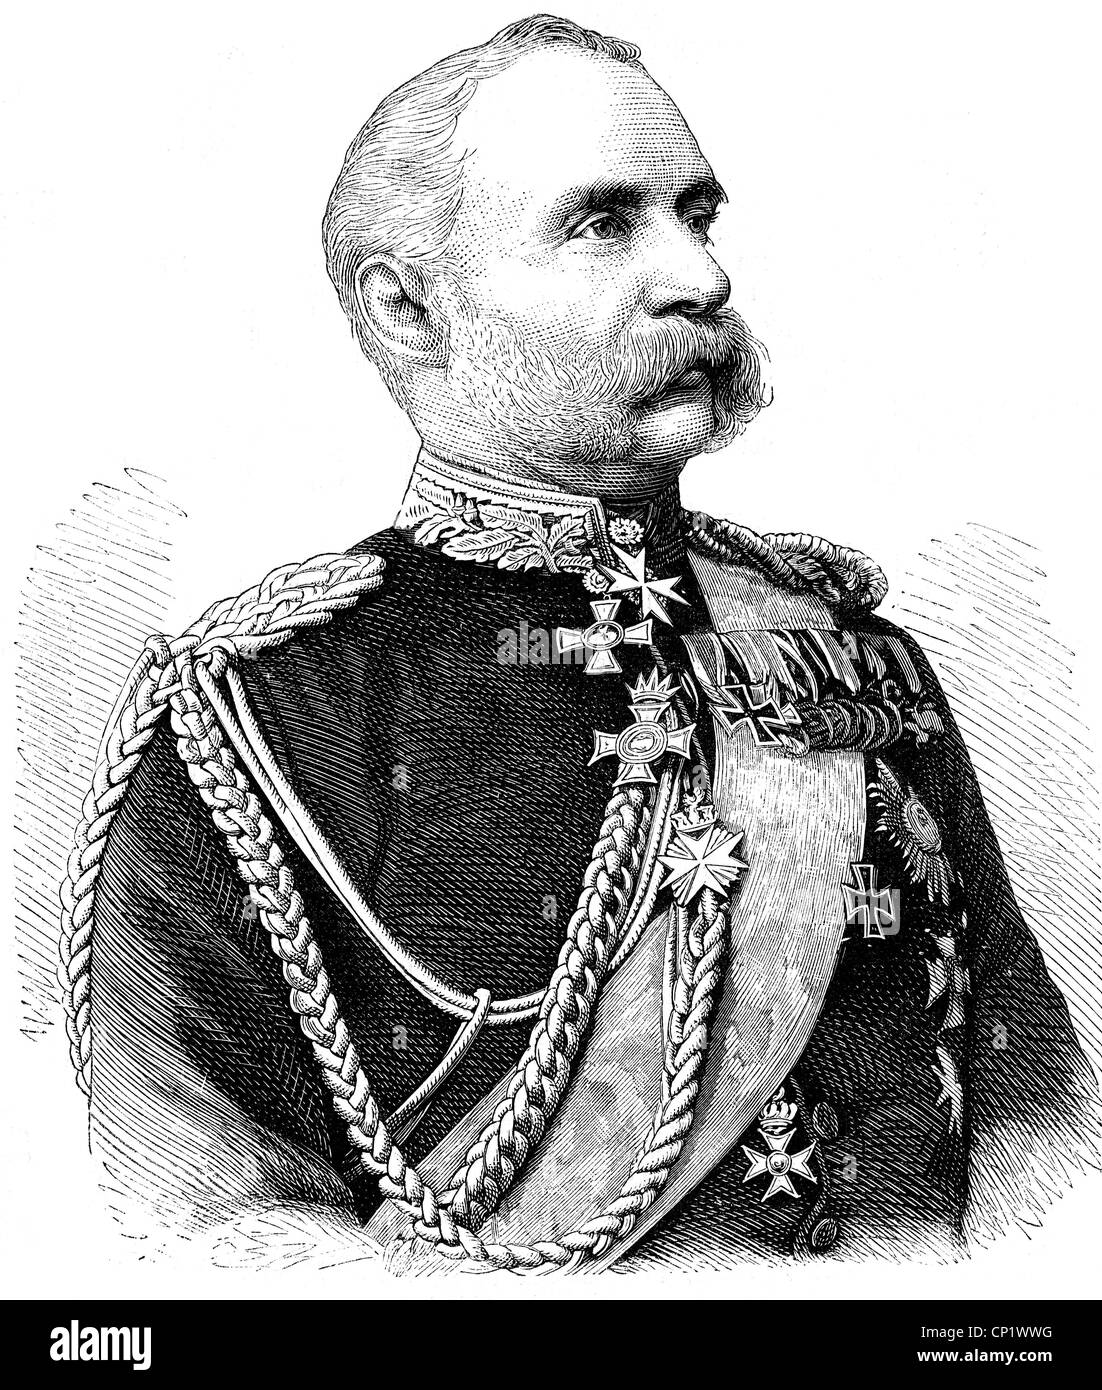 Kirchbach, Hugo Ewald von, 23.5.1809 - 6.10.1887, Prussian general, commanding general of V Army Corps 16.5.1871 - 3.2.1880, portrait, wood engraving, circa 1875, Stock Photo